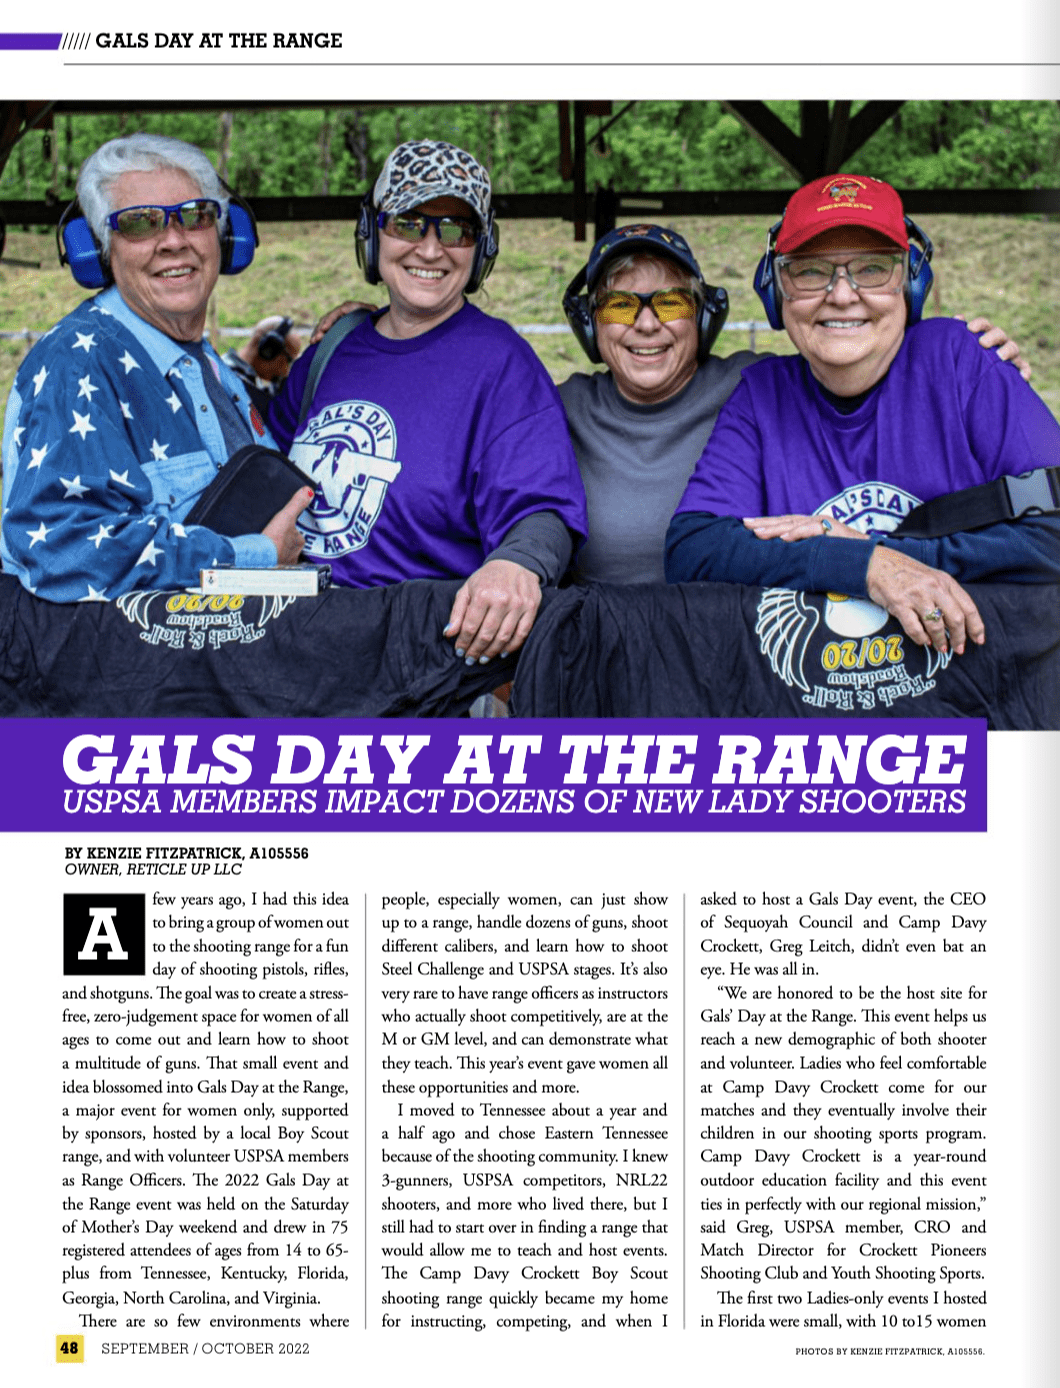 Gals Day at the Range: USPSA Members Impact Dozens of New Lady Shooters